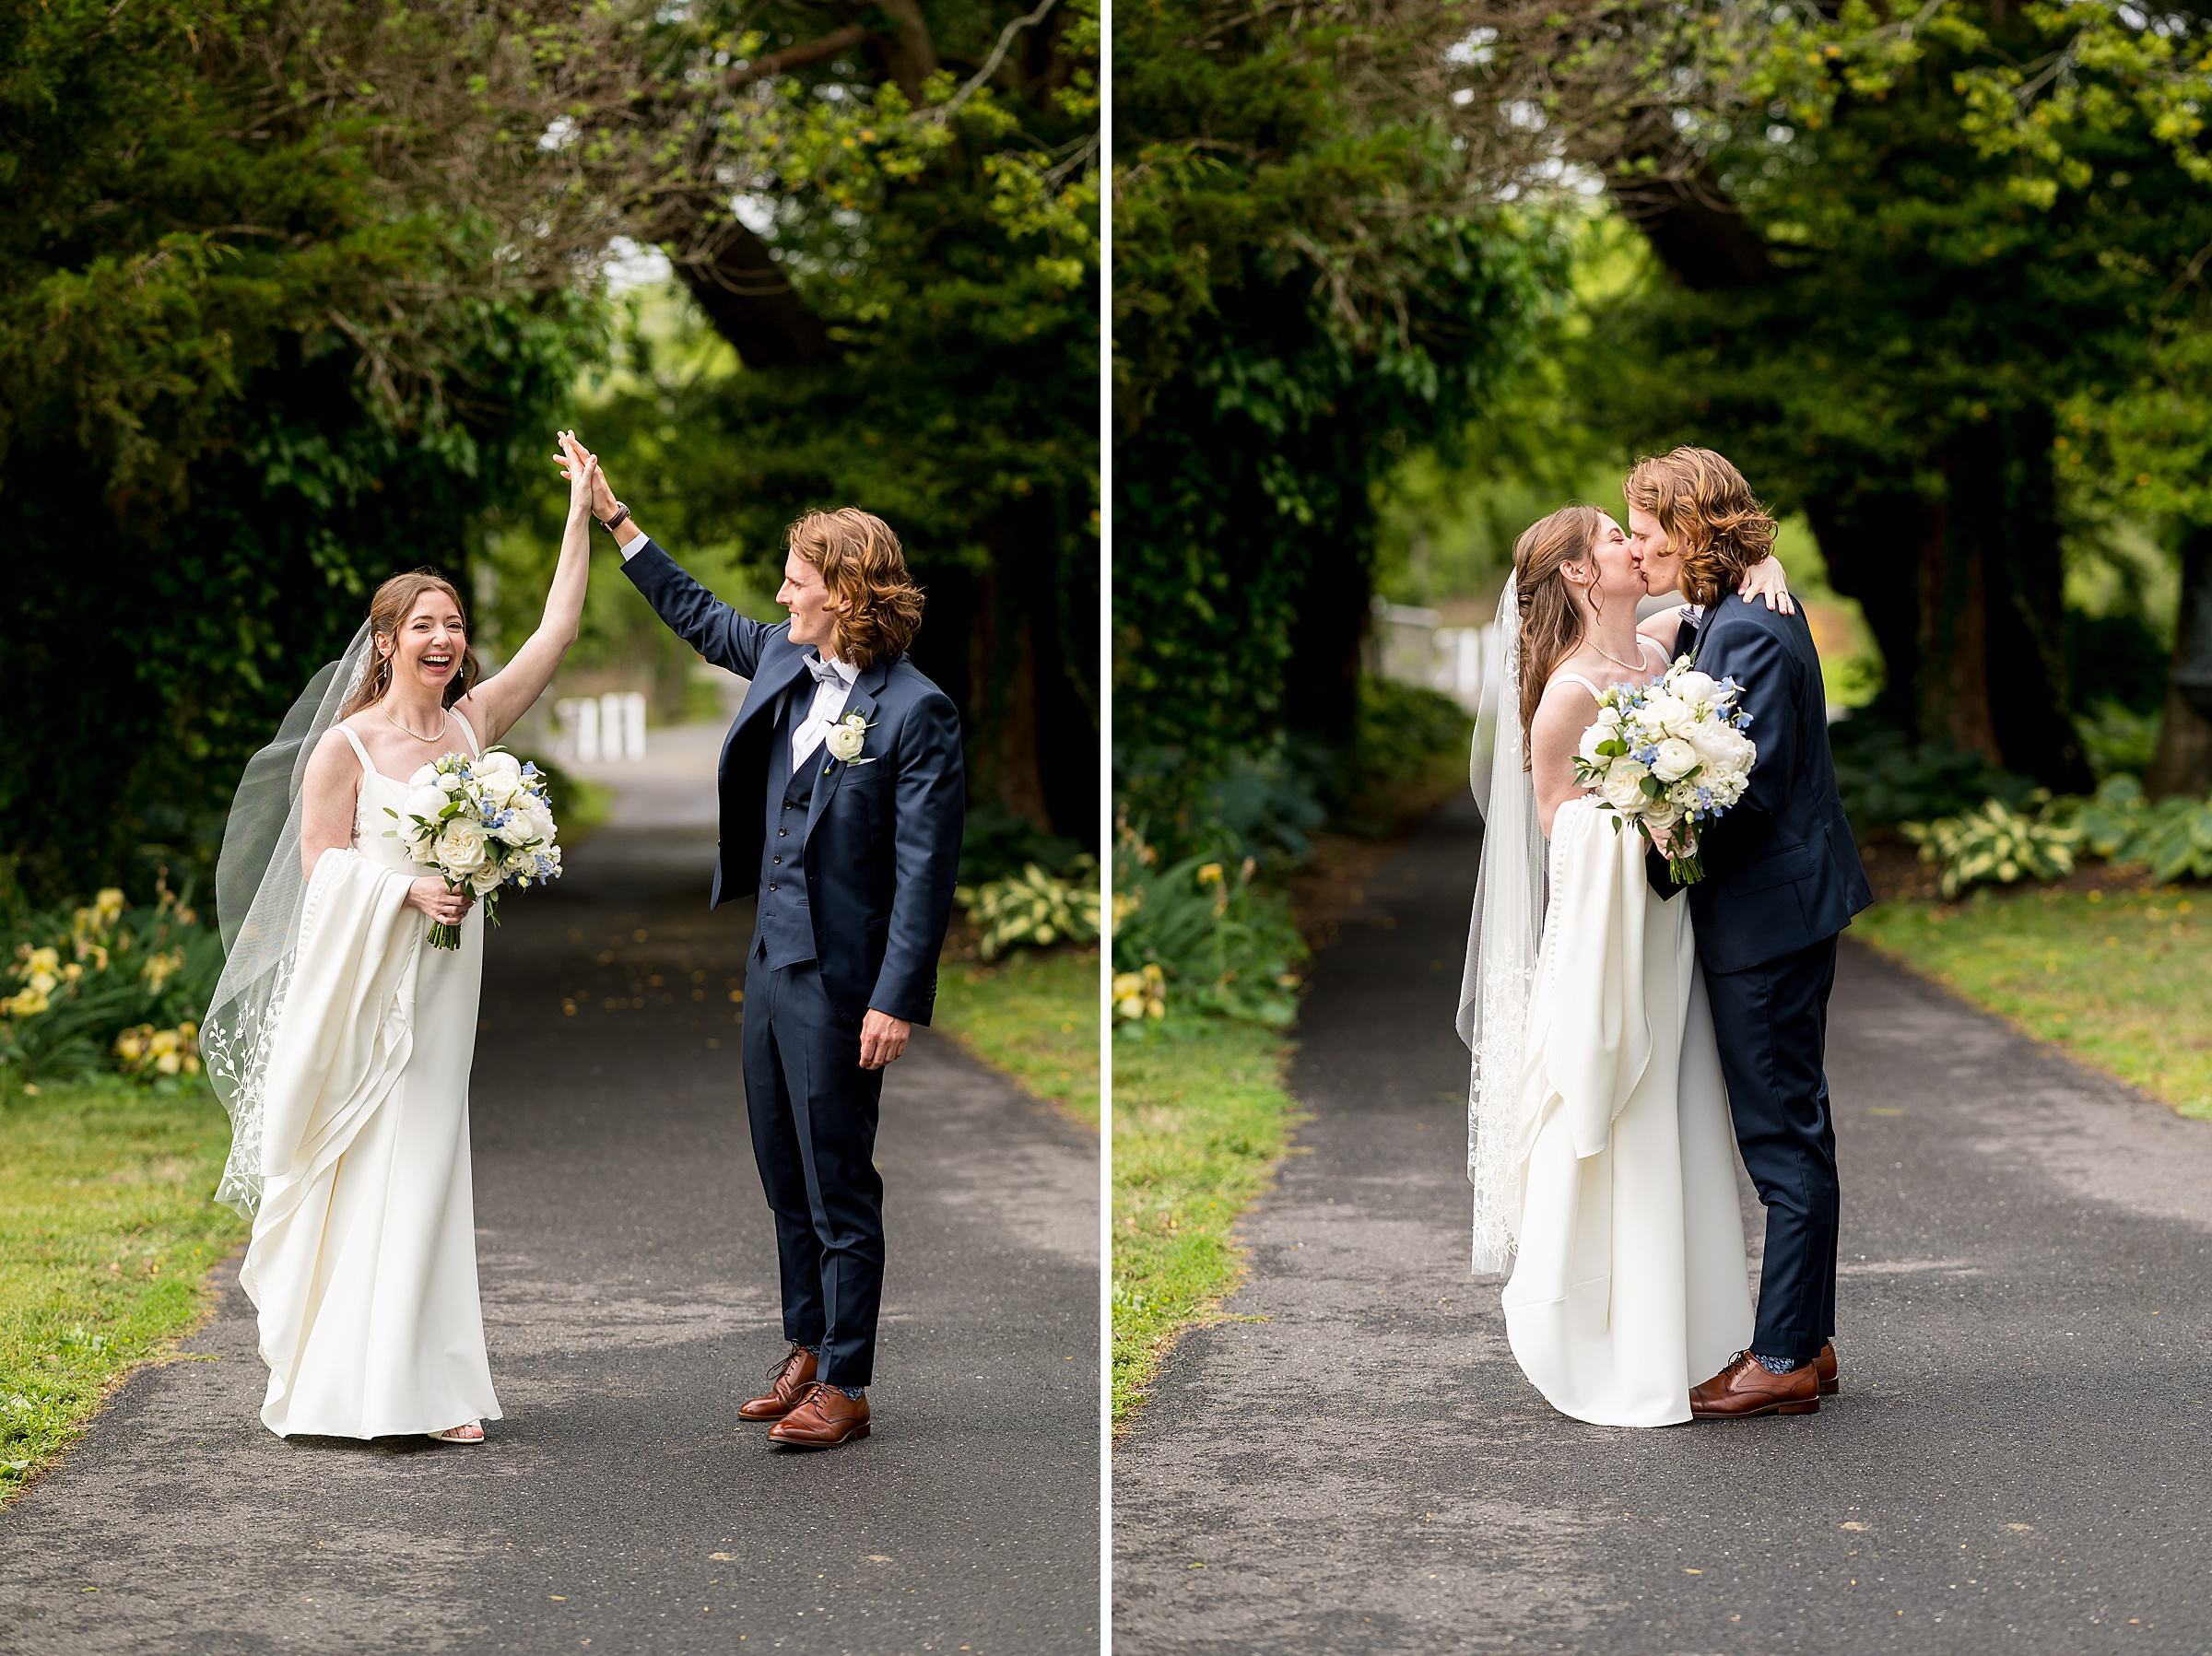 A bride and groom are outdoors on a tree-lined path. In the left image, they hold hands and smile. In the right image, they kiss while holding hands. The bride holds a bouquet.